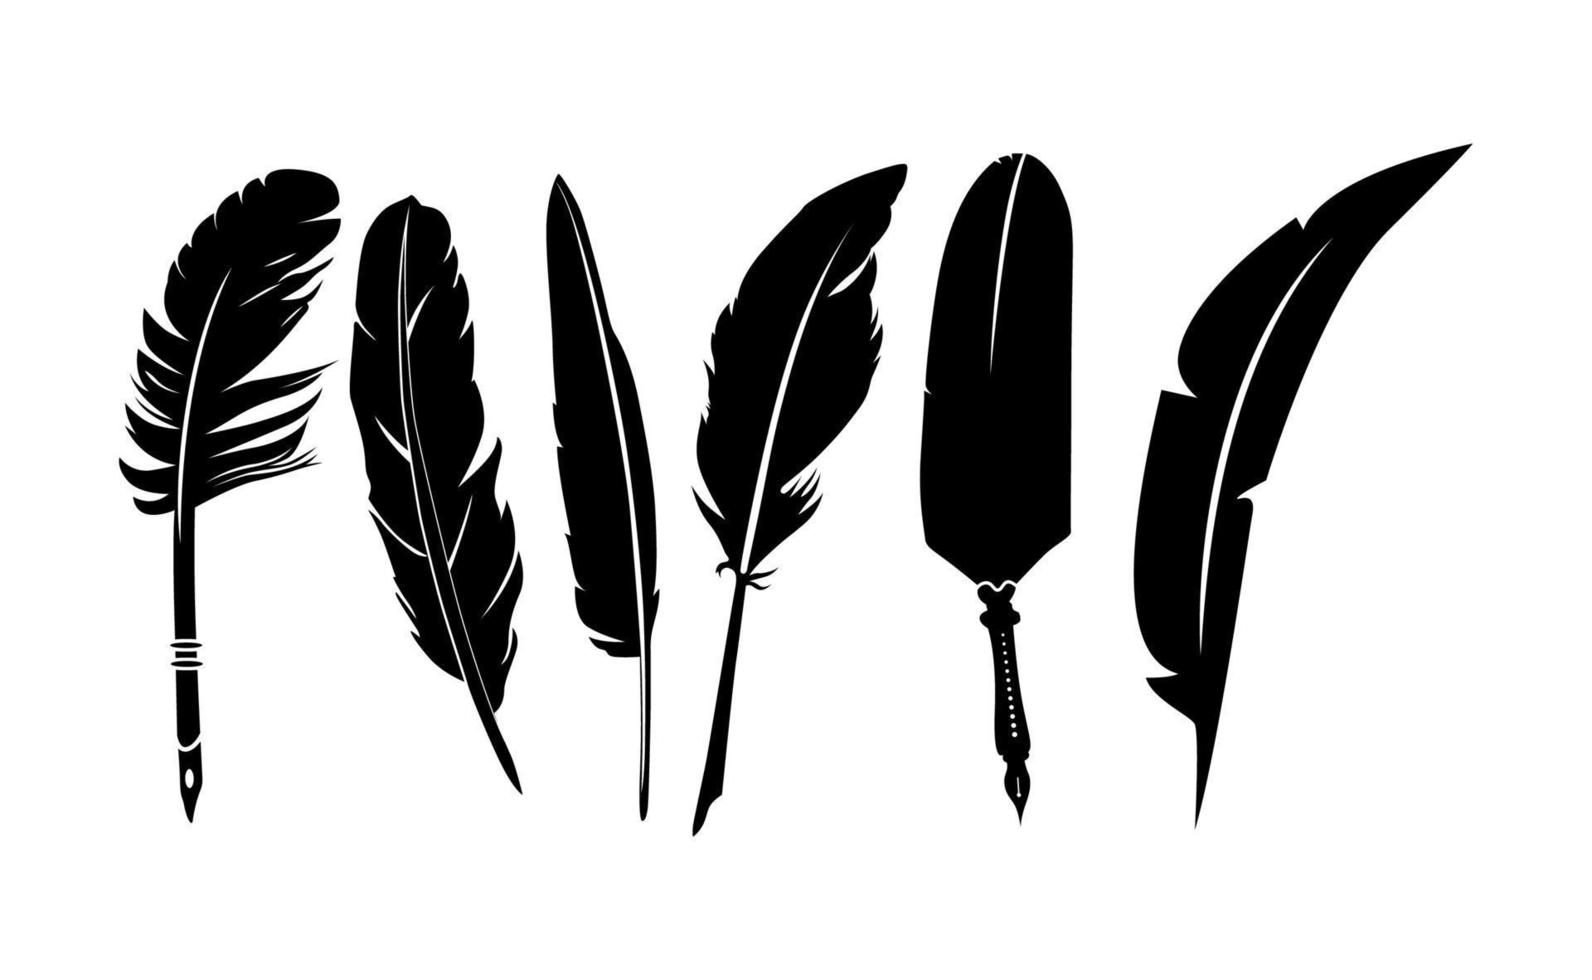 quill feather pen silhouette set design inspiration vector